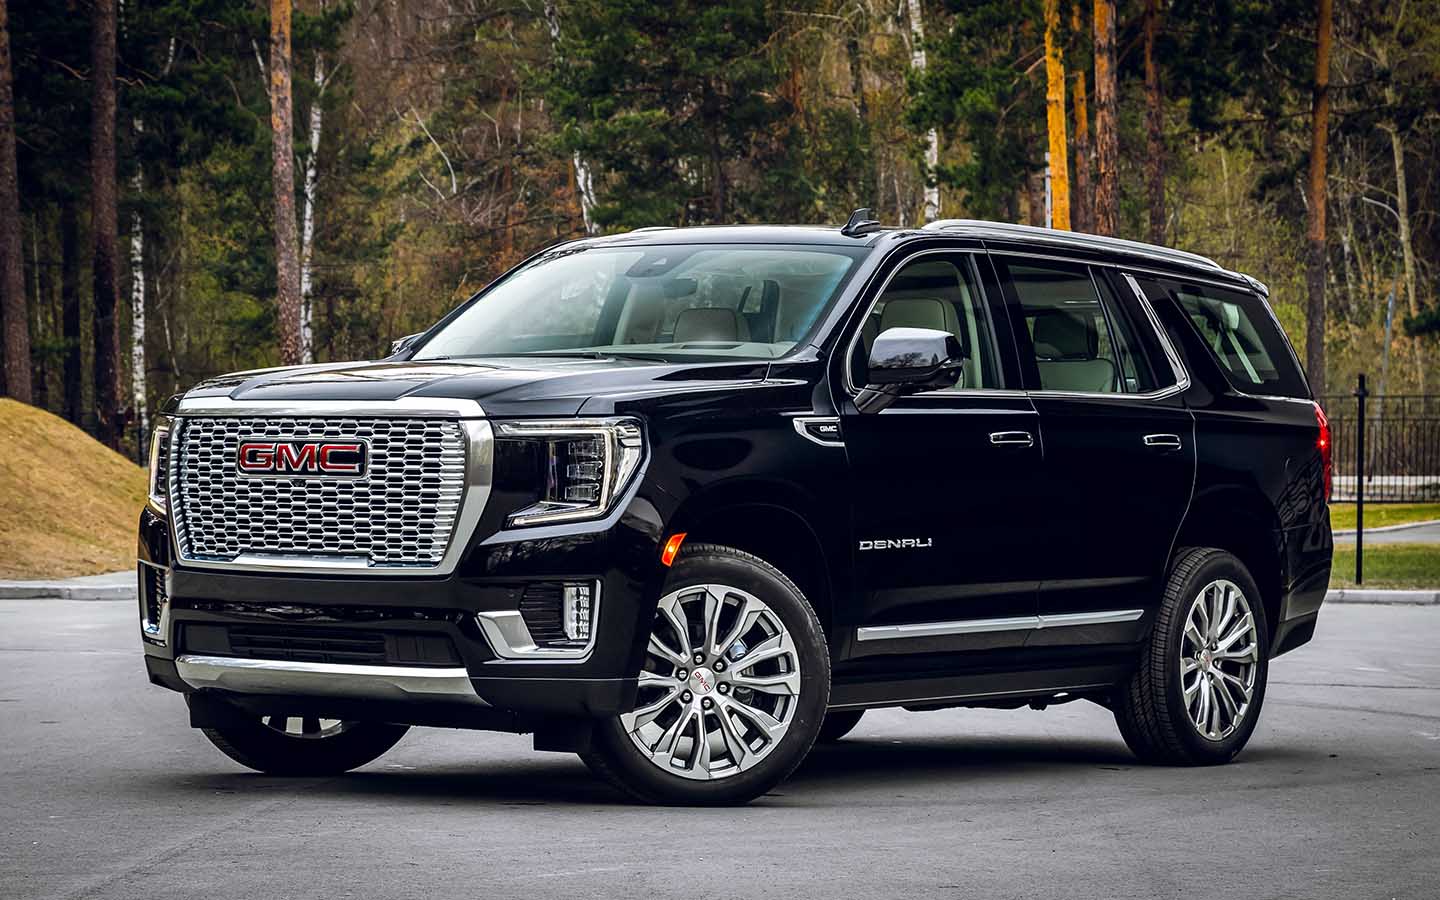 the gmc sierra has a towing capacity of 5897 kg